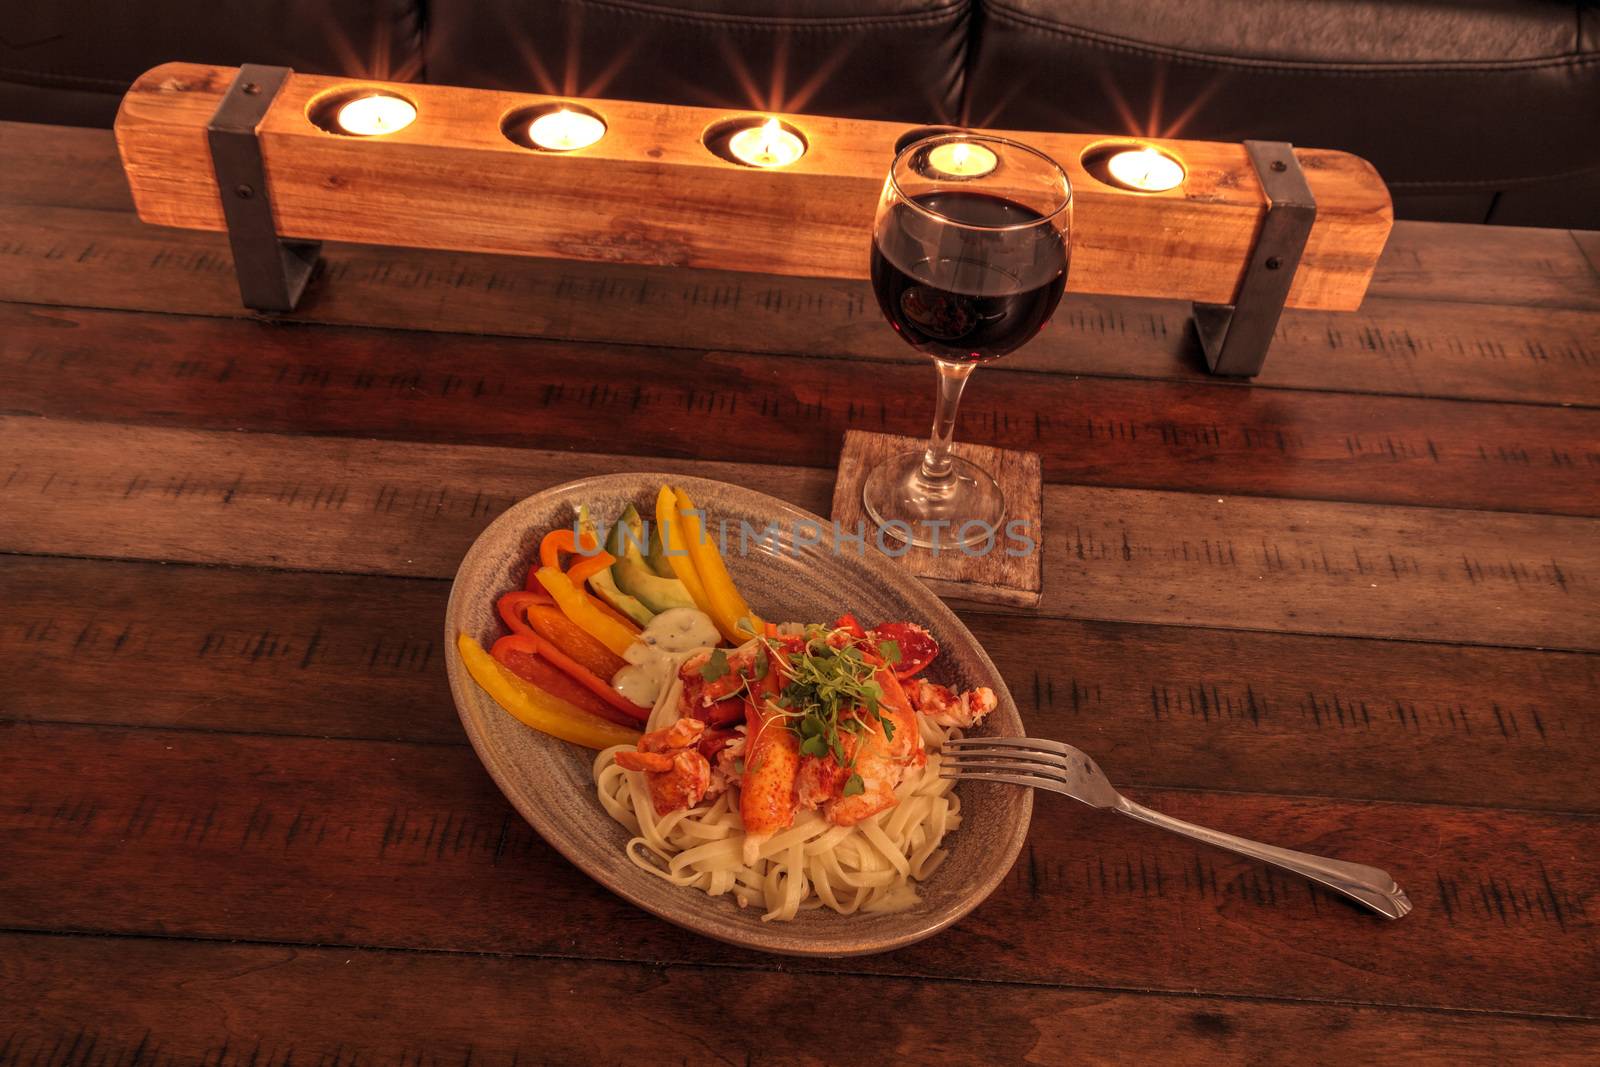 Red wine with Maine lobster over a bed of linguini with micro greens, colorful peppers and avocado sauce.